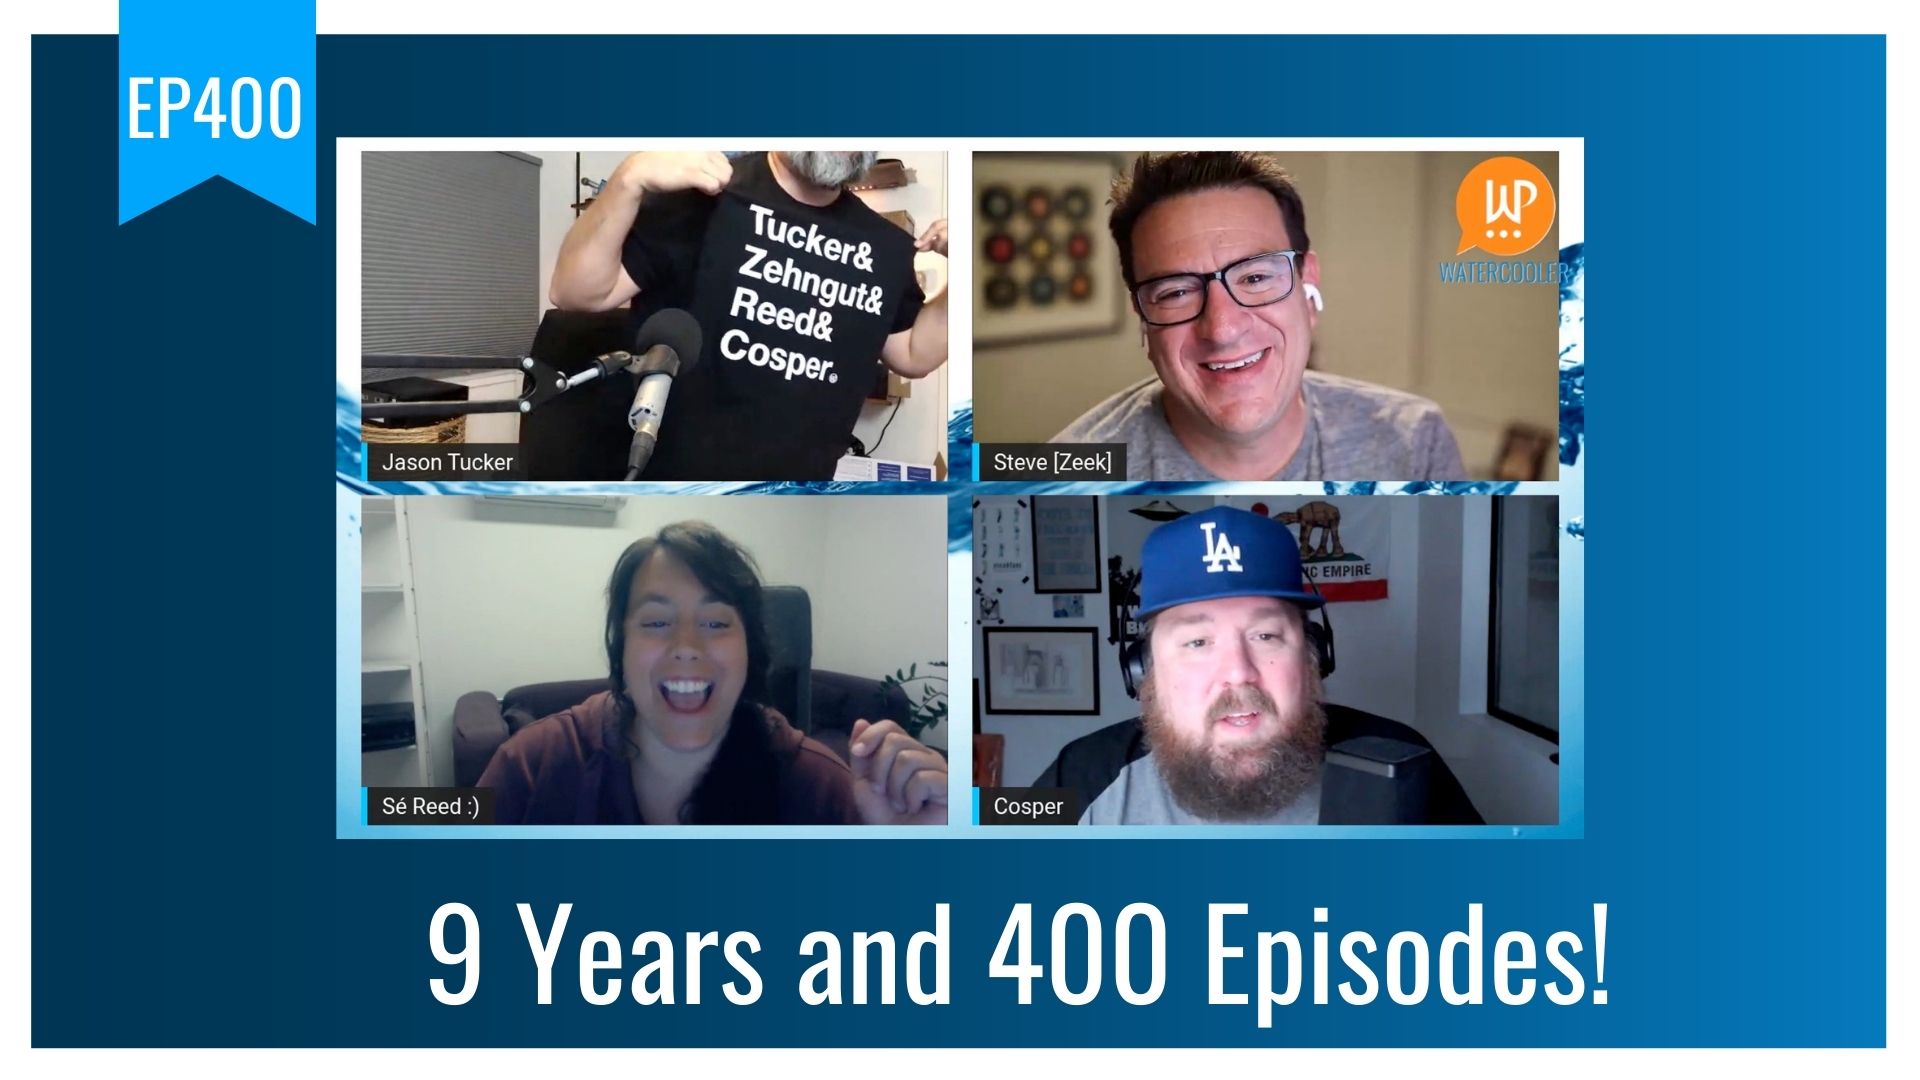 EP400 – 9 Years and 400 Episodes!